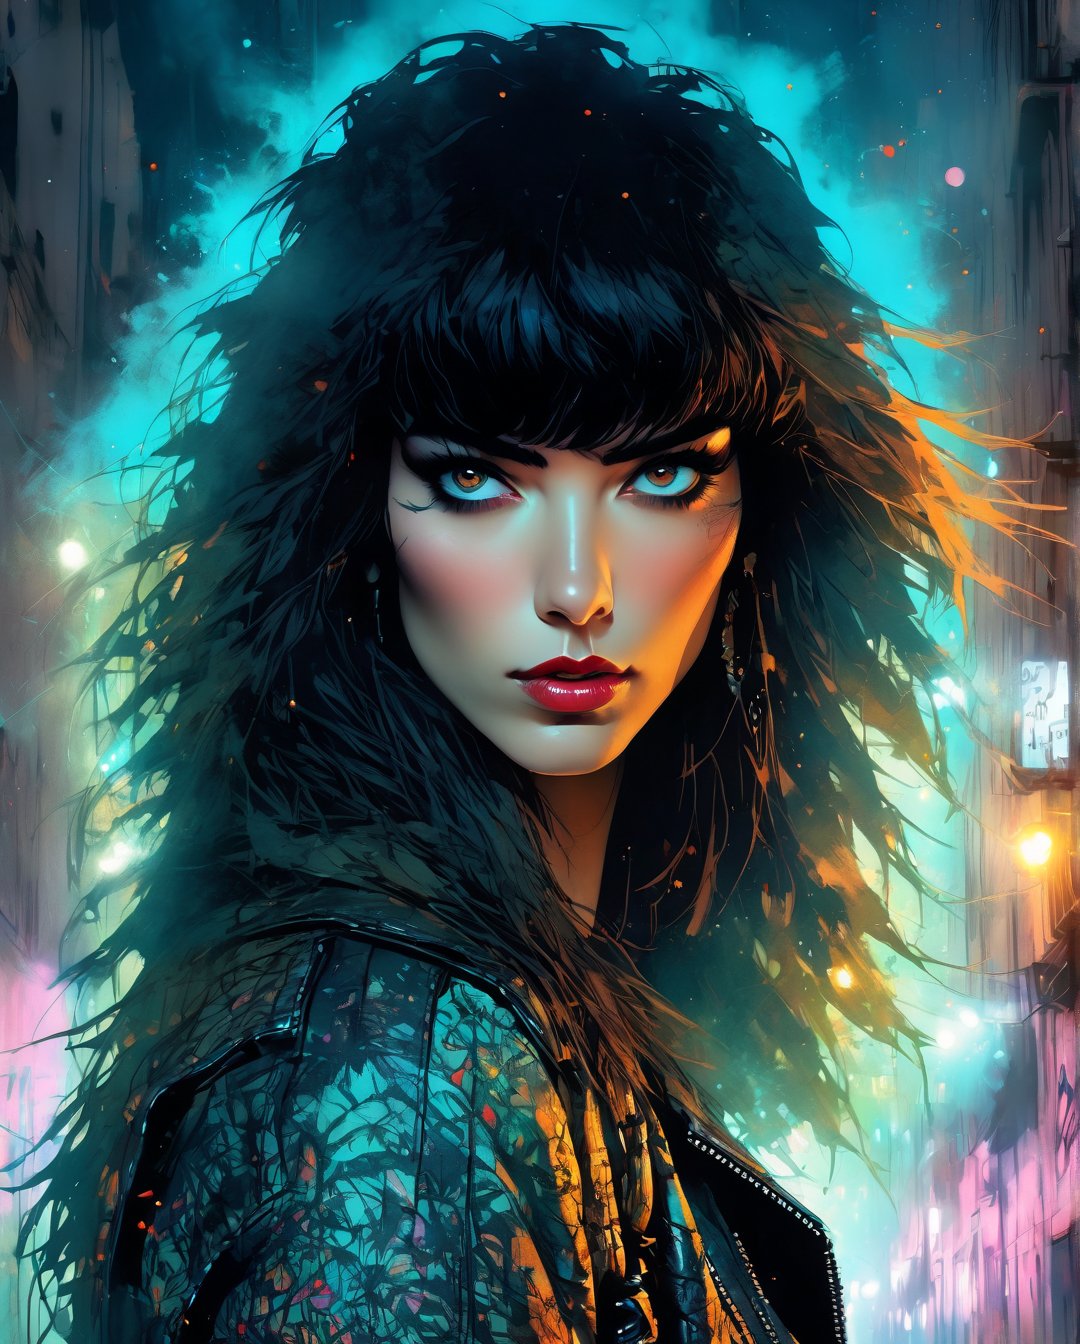 (head shot by Carne Griffiths, Conrad Roset), Masterpiece, photorealistic, highly detailed, a young woman with smooth  dark long black hair with bangs and black eyes and black lips, wearing leather jacket and leather pants, standing, looking at camera, in a gloomy smoke filled alley at night with a full moon